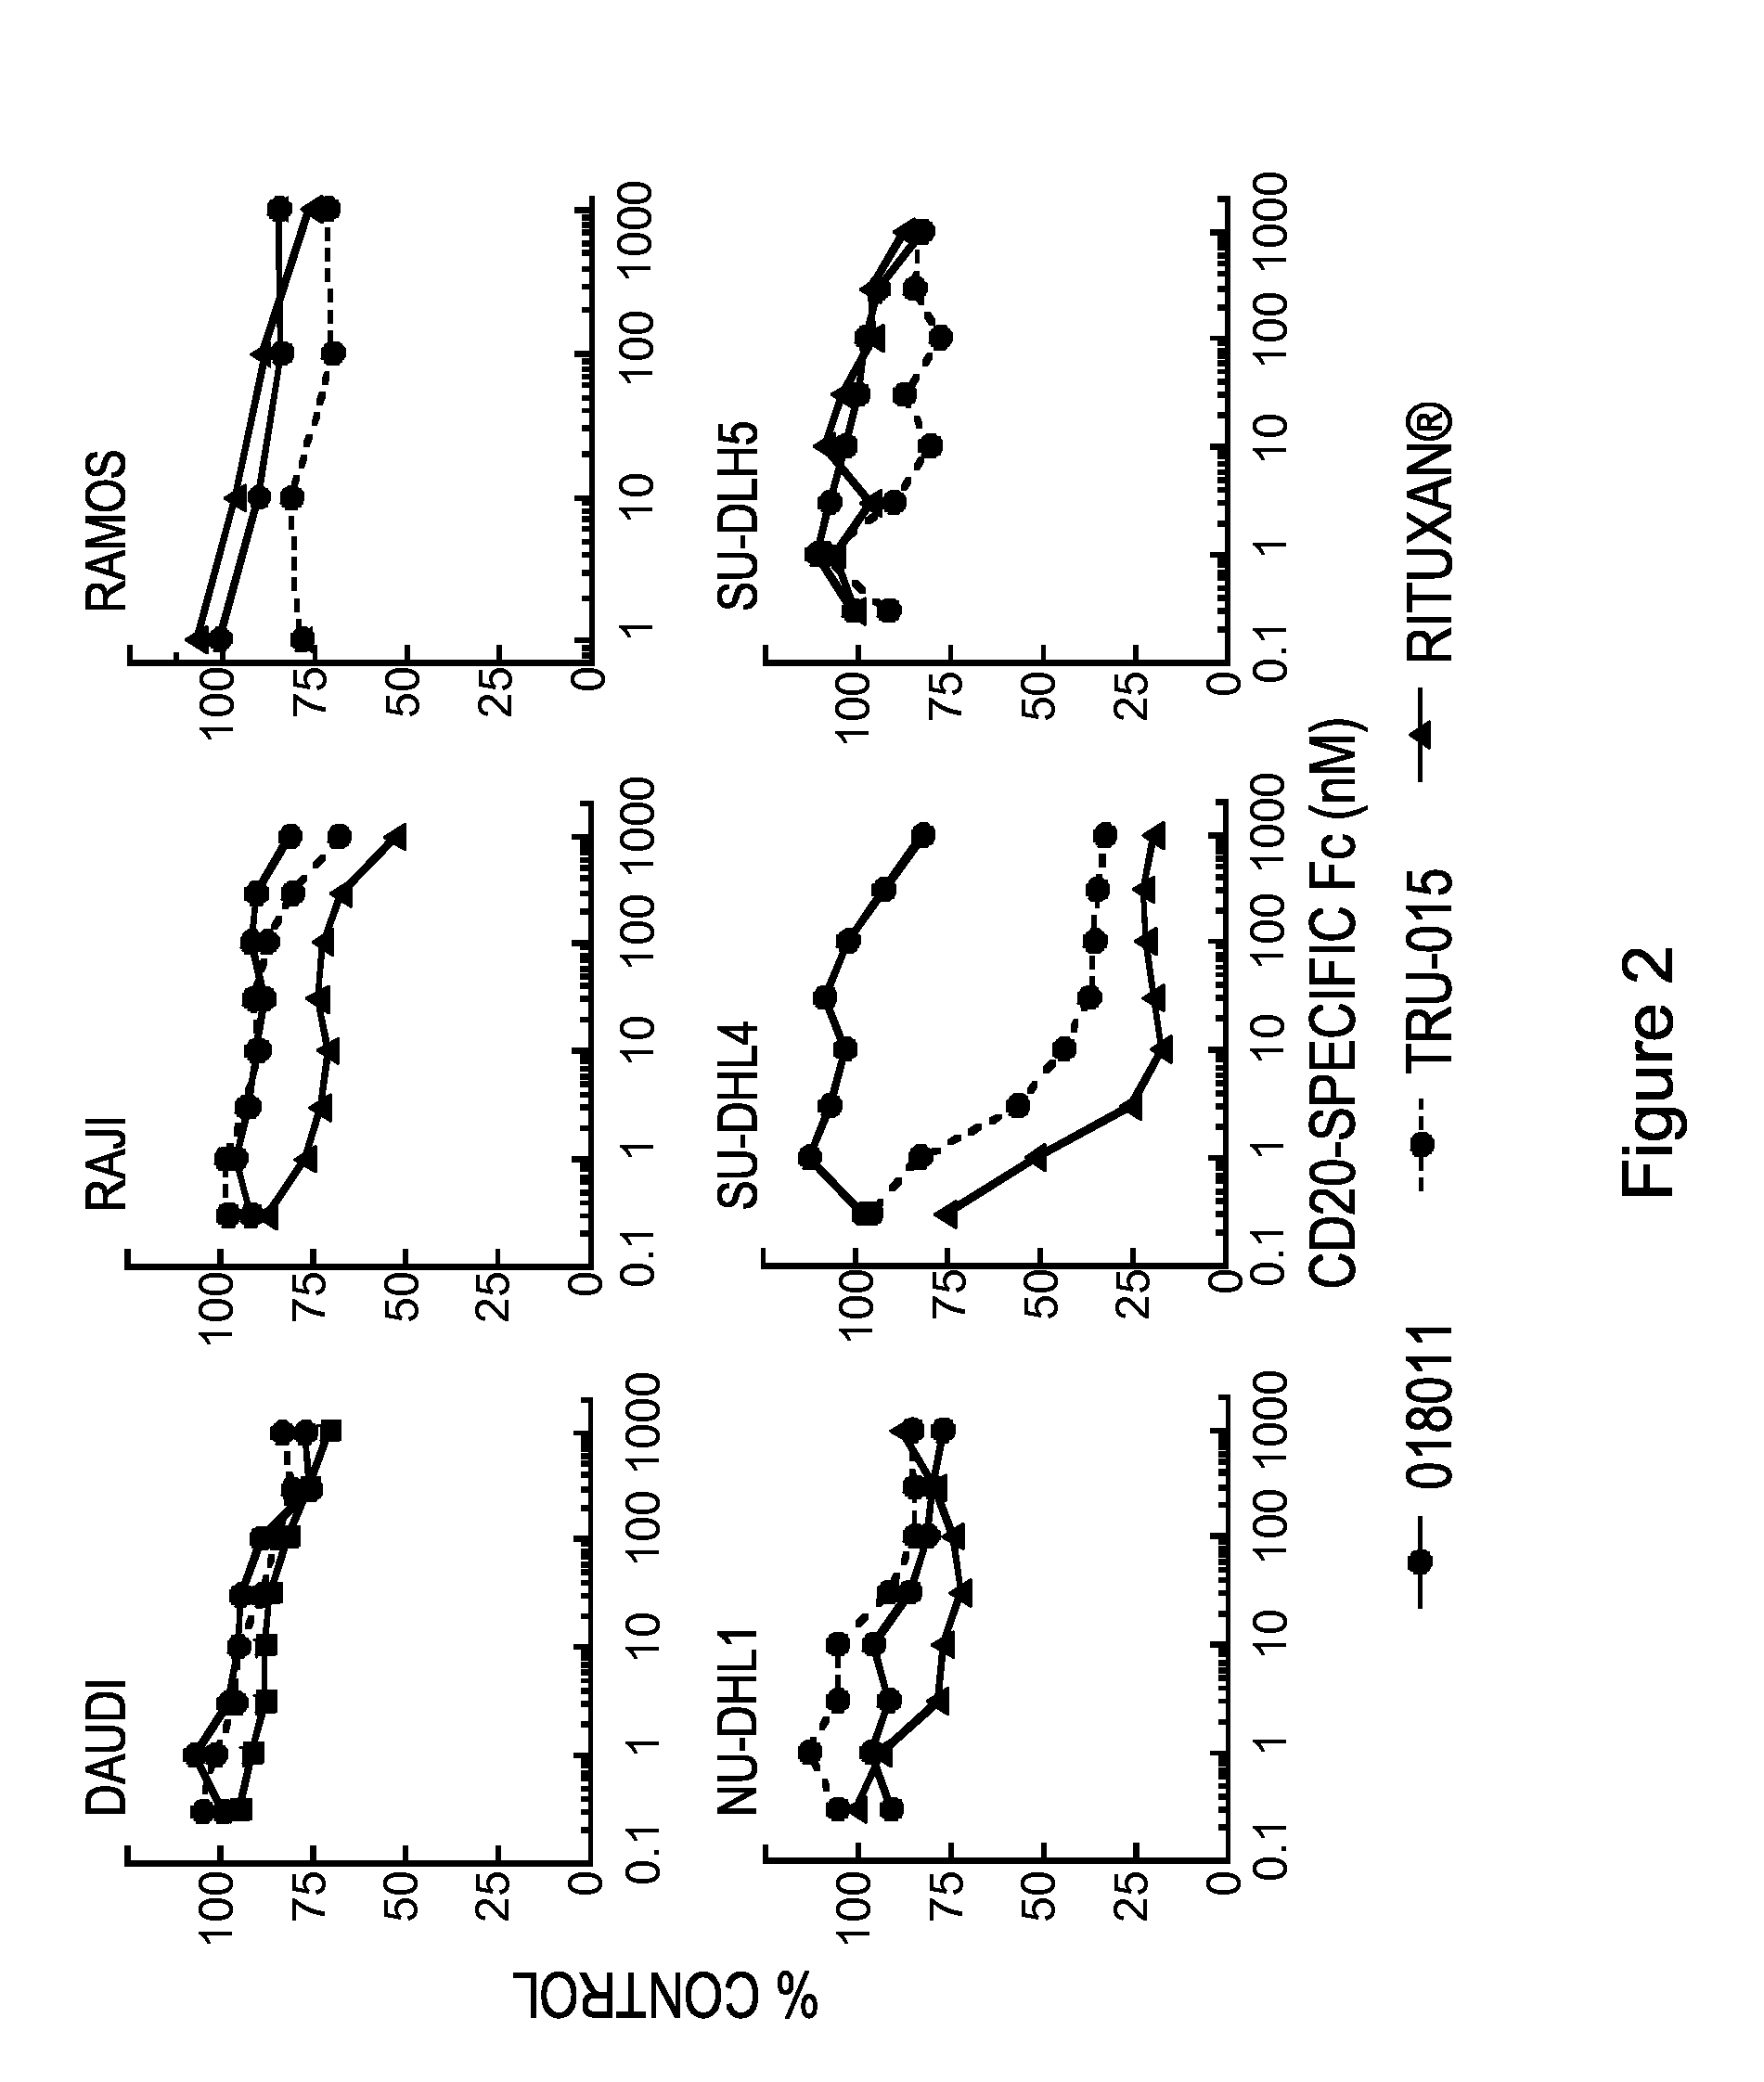 Anti-cd20 therapeutic compositions and methods